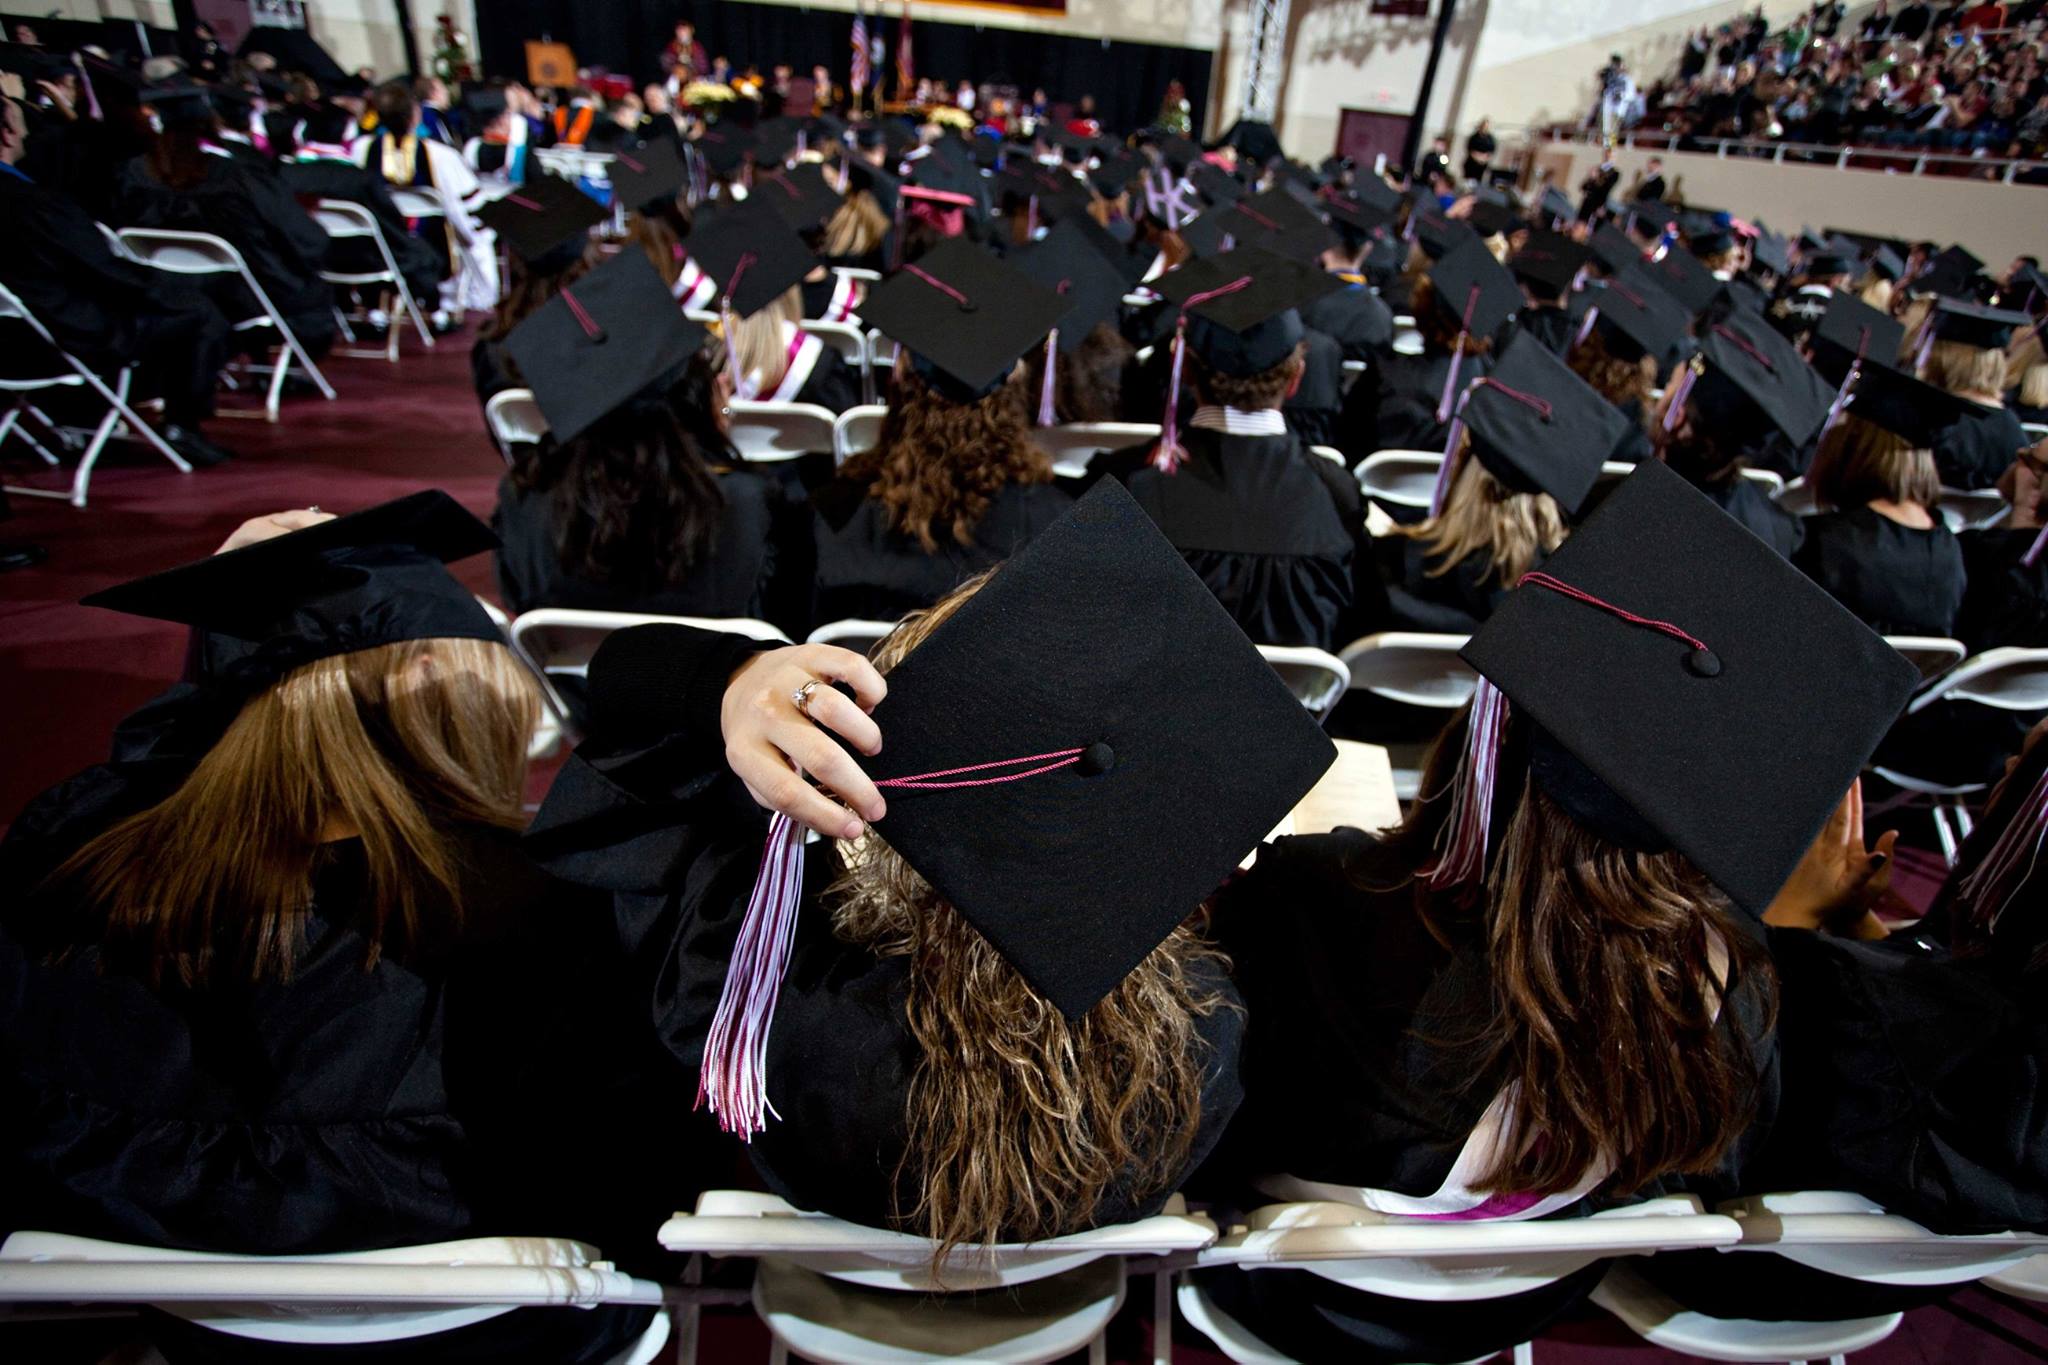 View of students wearing graduation cap and gown from behind